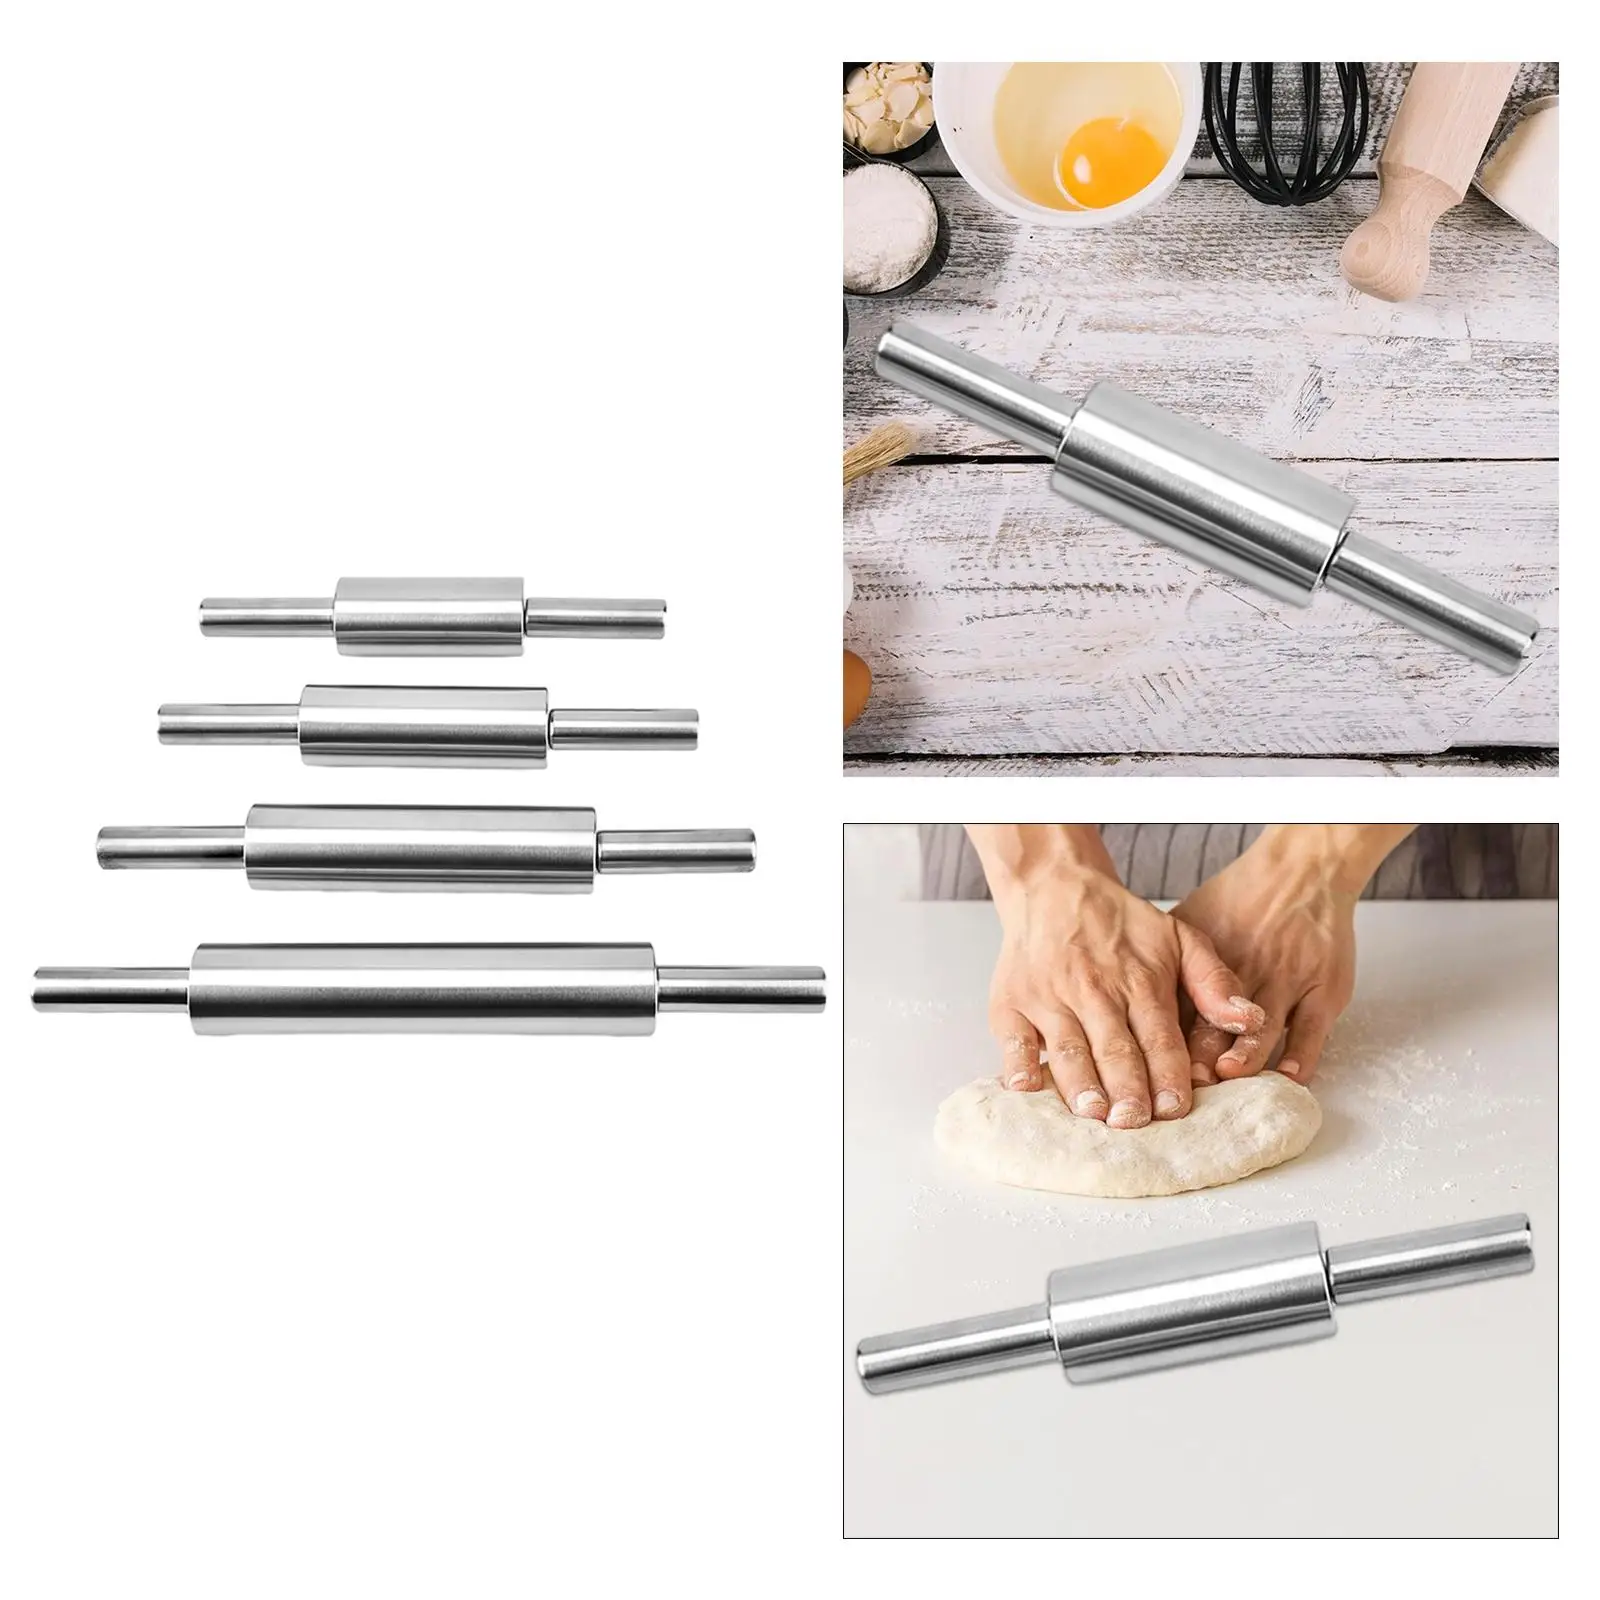 Kitchen Rolling Pin Easy Cleaning Multifunctional Professional Kitchen Supplies for Pizza Pie Pasta Cookies Pastry Biscuit